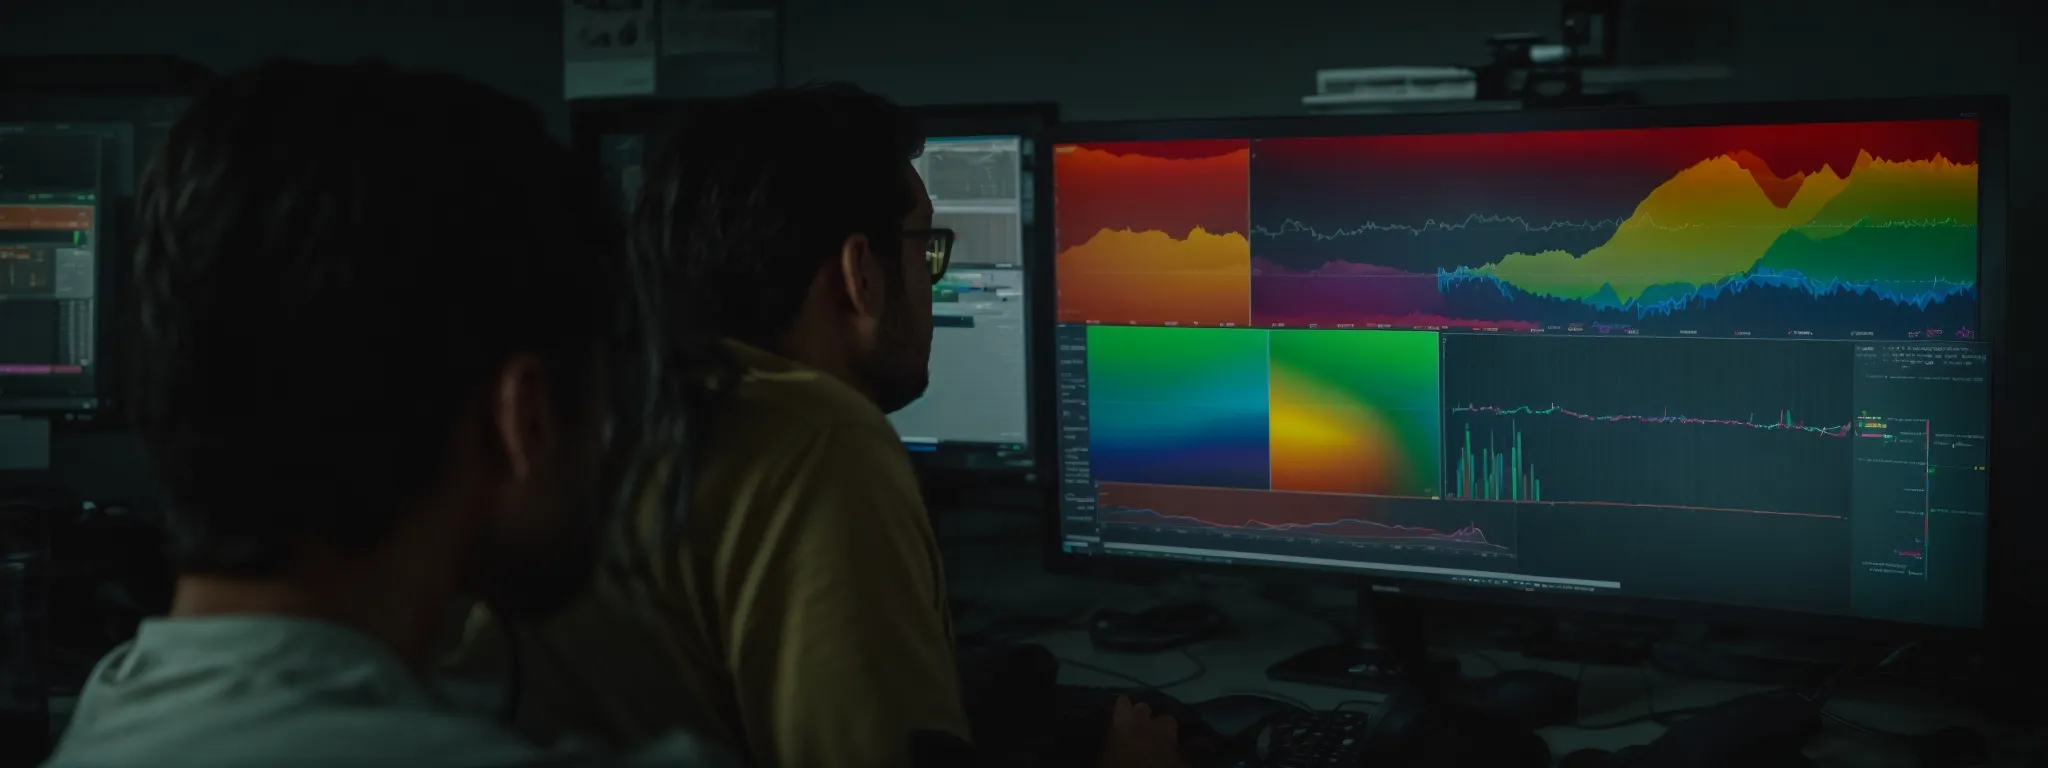 a team gathered around a large computer monitor, intently analyzing a colorful analytics dashboard.